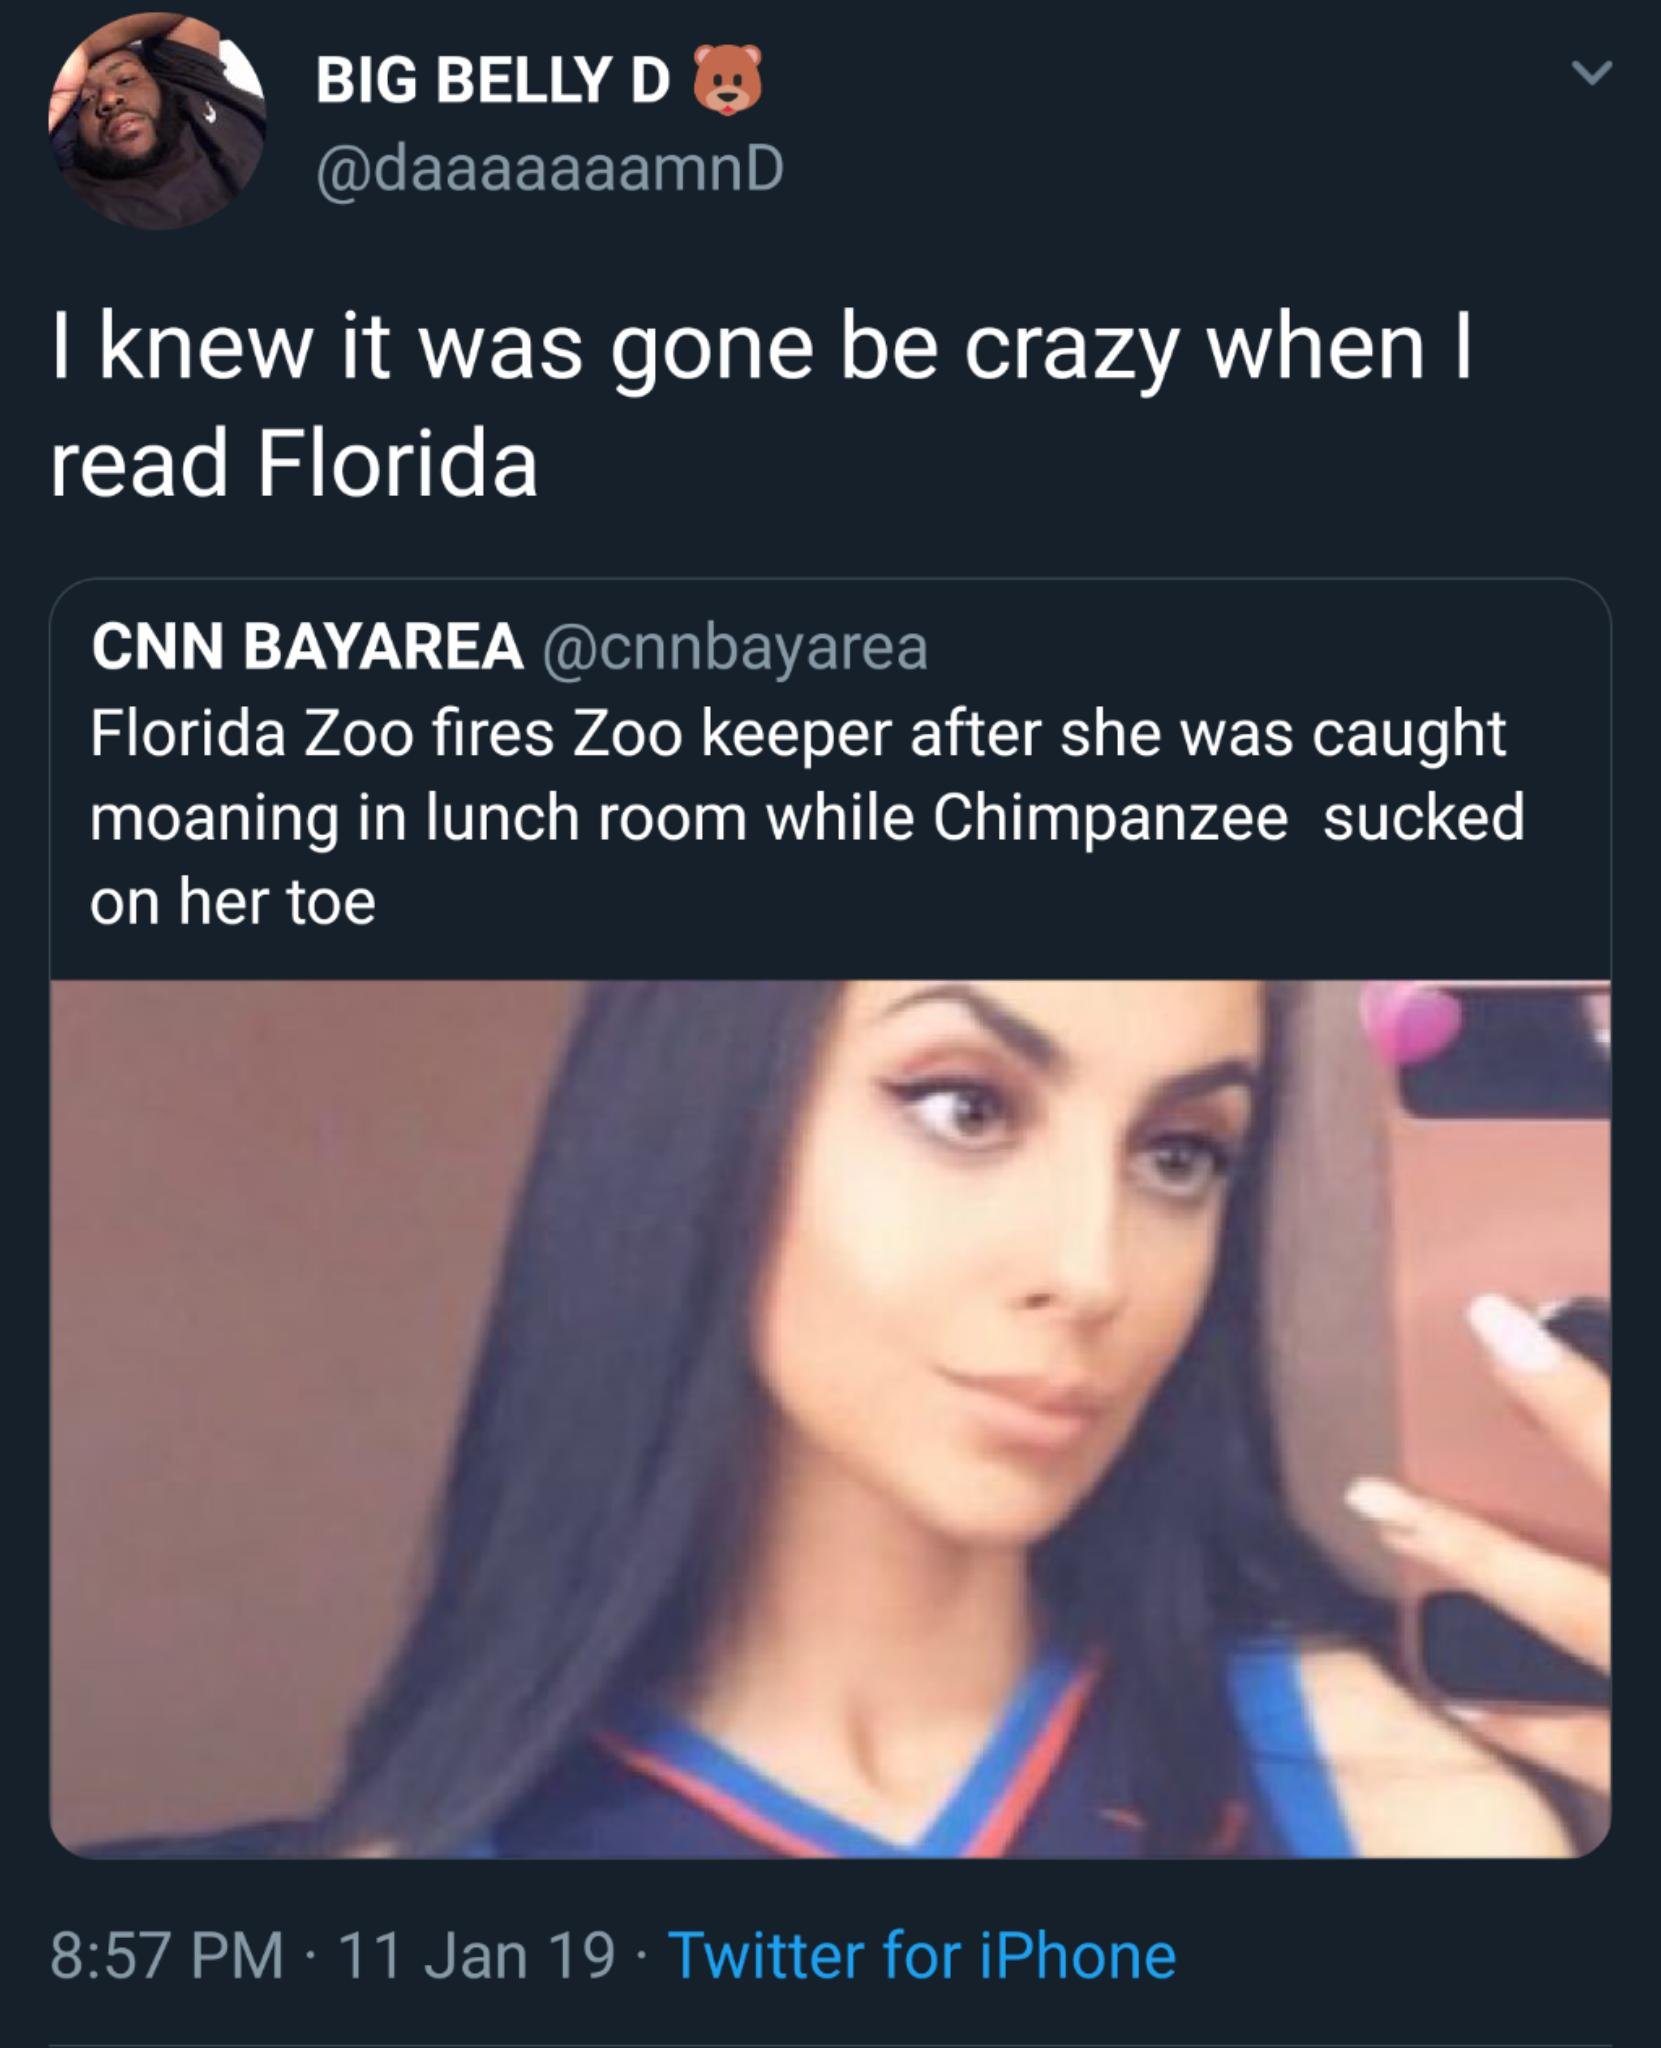 florida zoo fires zoo keeper - Big Belly Do I knew it was gone be crazy when I read Florida Cnn Bayarea Florida Zoo fires Zoo keeper after she was caught moaning in lunch room while Chimpanzee sucked on her toe 11 Jan 19 Twitter for iPhone